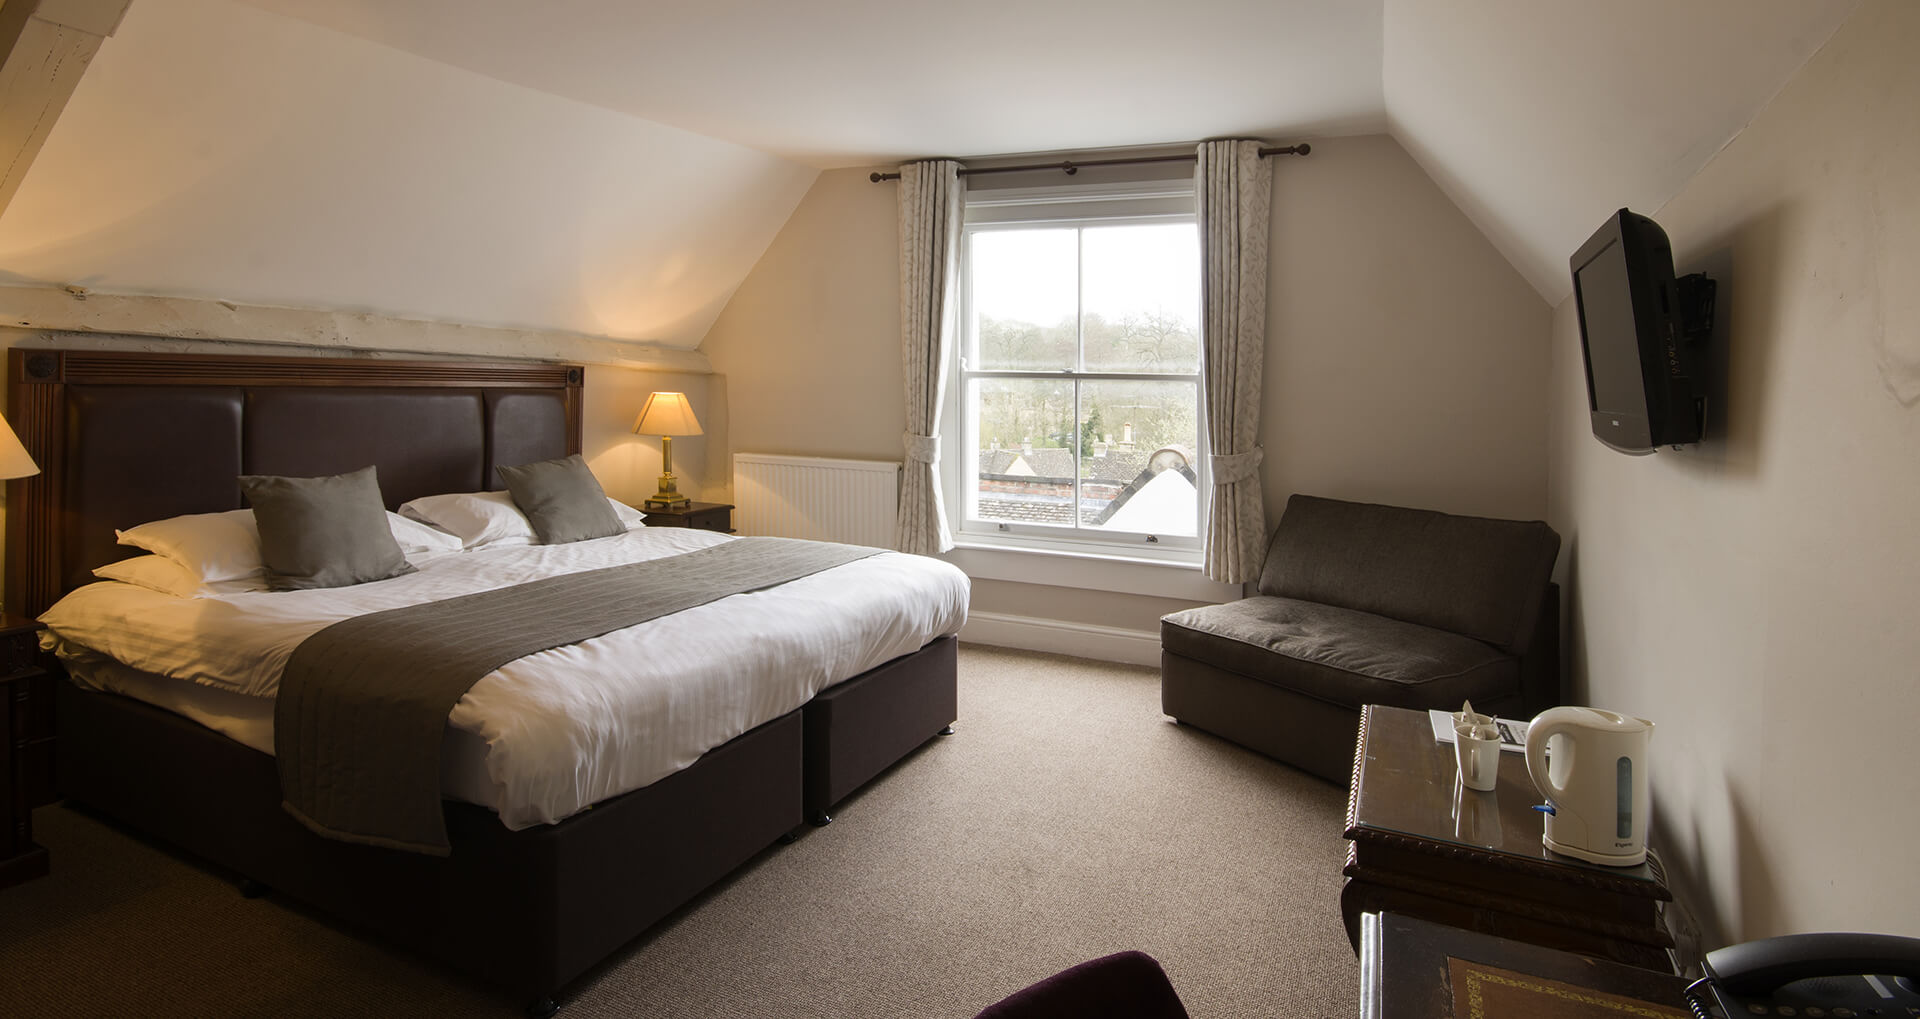 Rooms at The White Hart Inn, Winchcombe